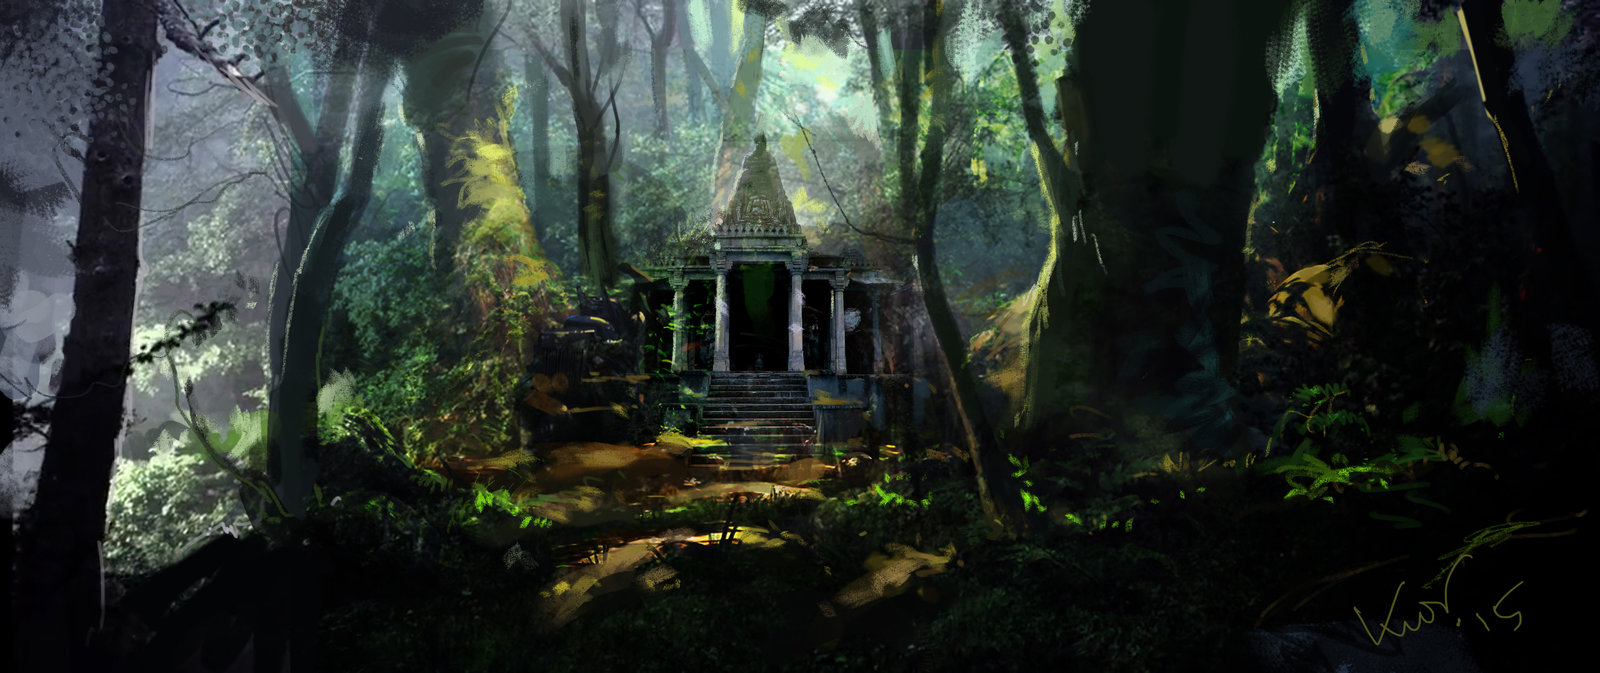 forest temple